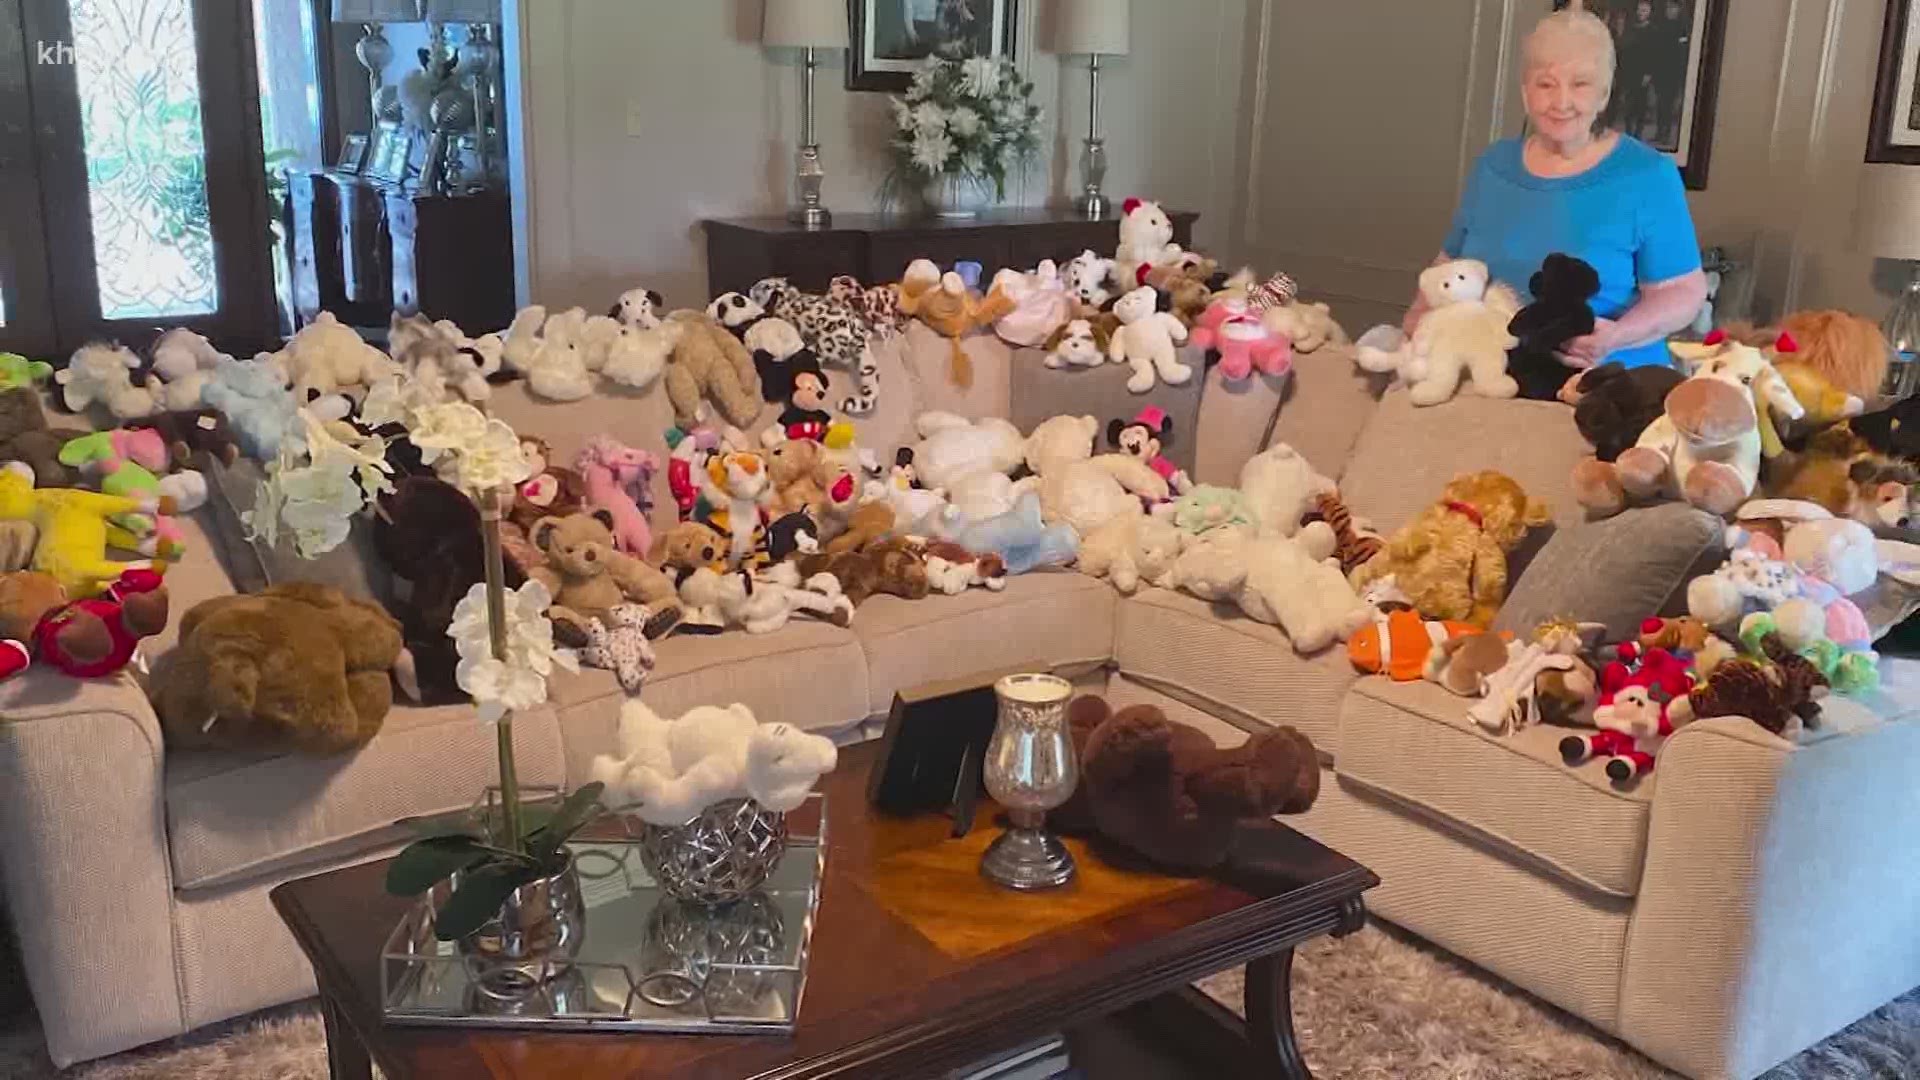 Marie Fuller began cleaning up old teddy bears about 15 years ago, because who doesn't like a stuffed animal? Hundreds of bears later, her grandson is now helping.